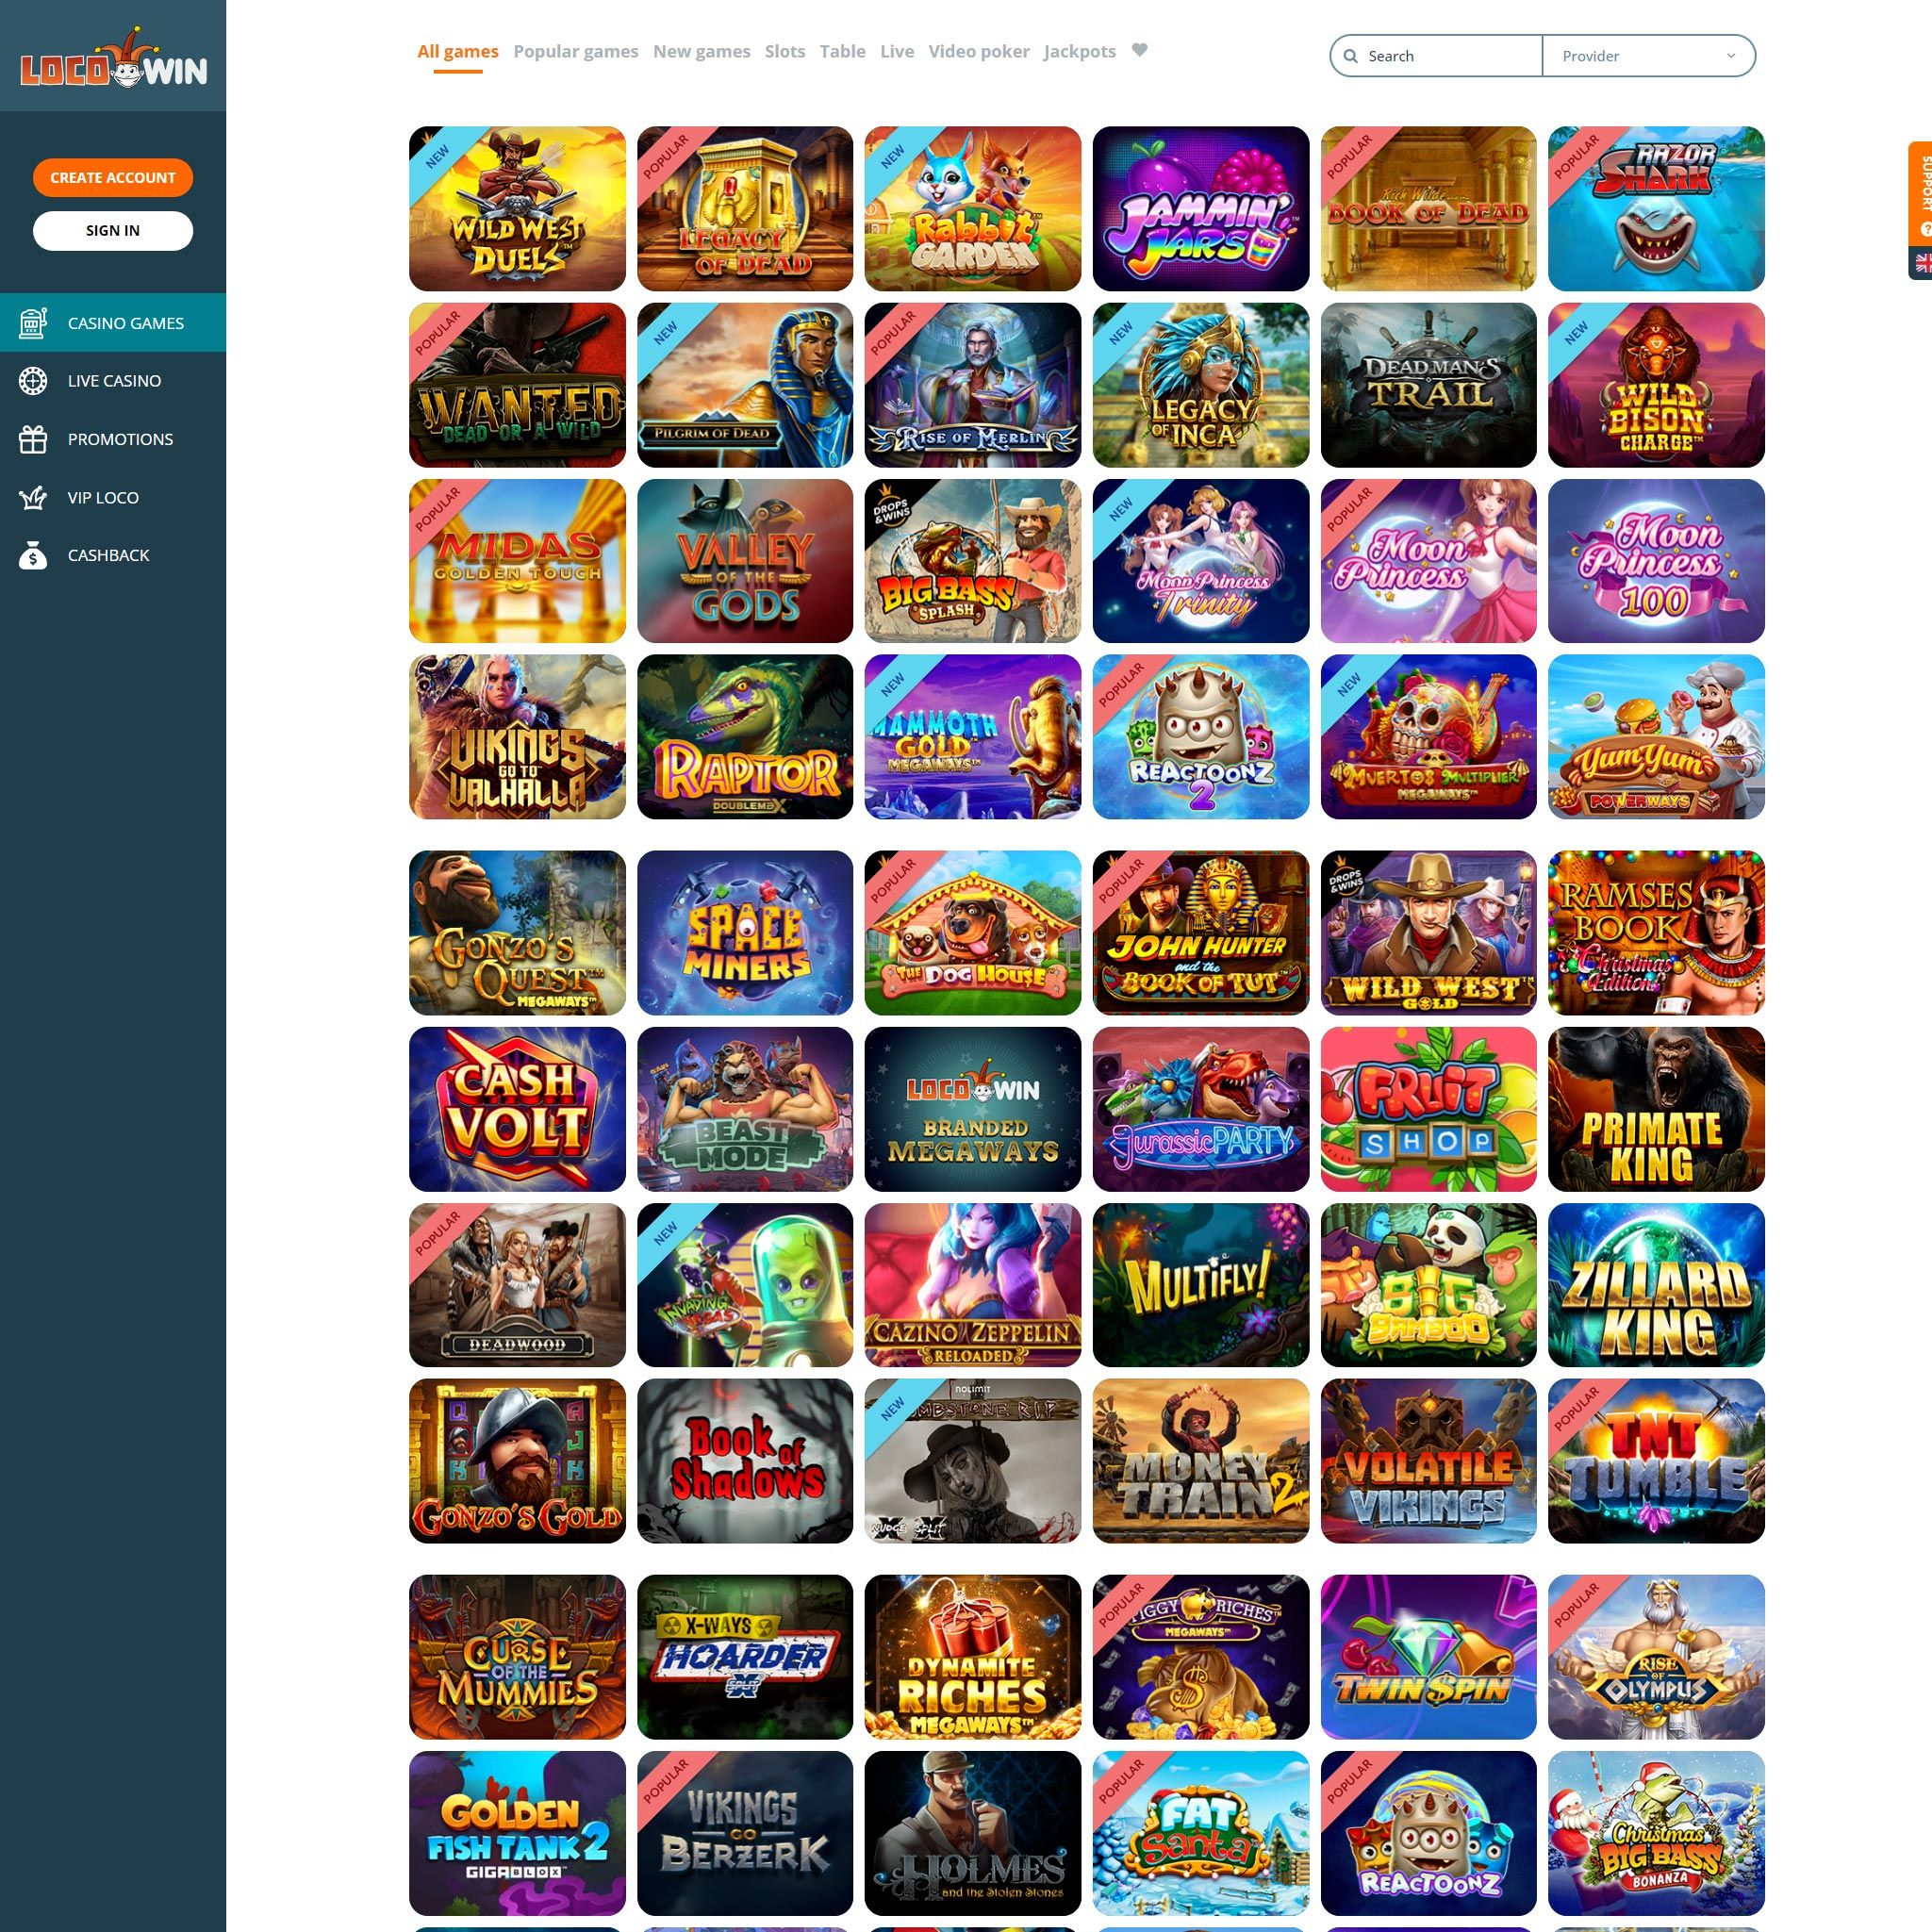 Locowin Casino review by Mr. Gamble